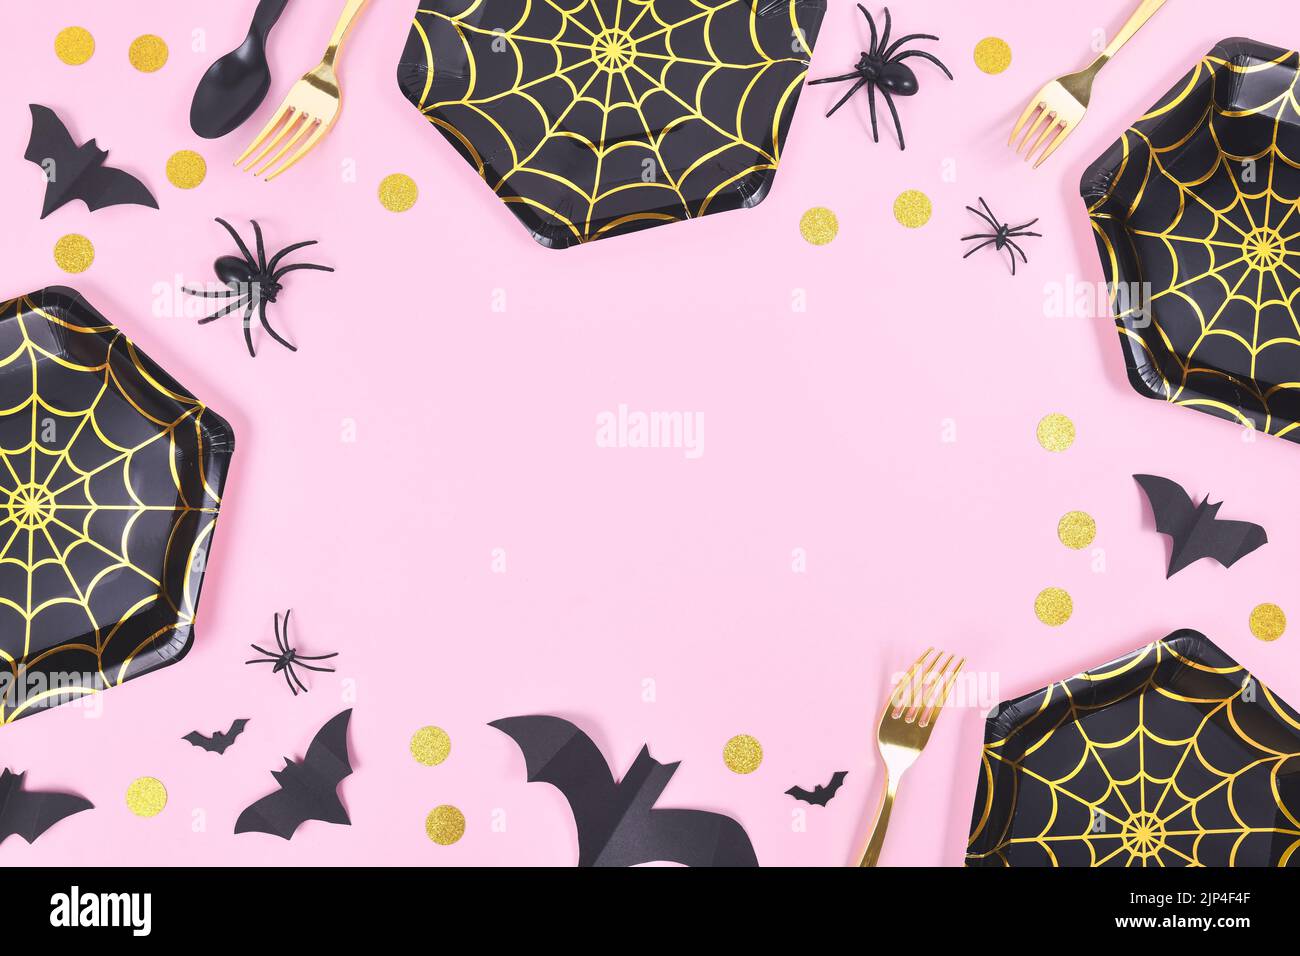 Halloween party frame with black and gold spider web plates, spiders and confetti on pink background Stock Photo